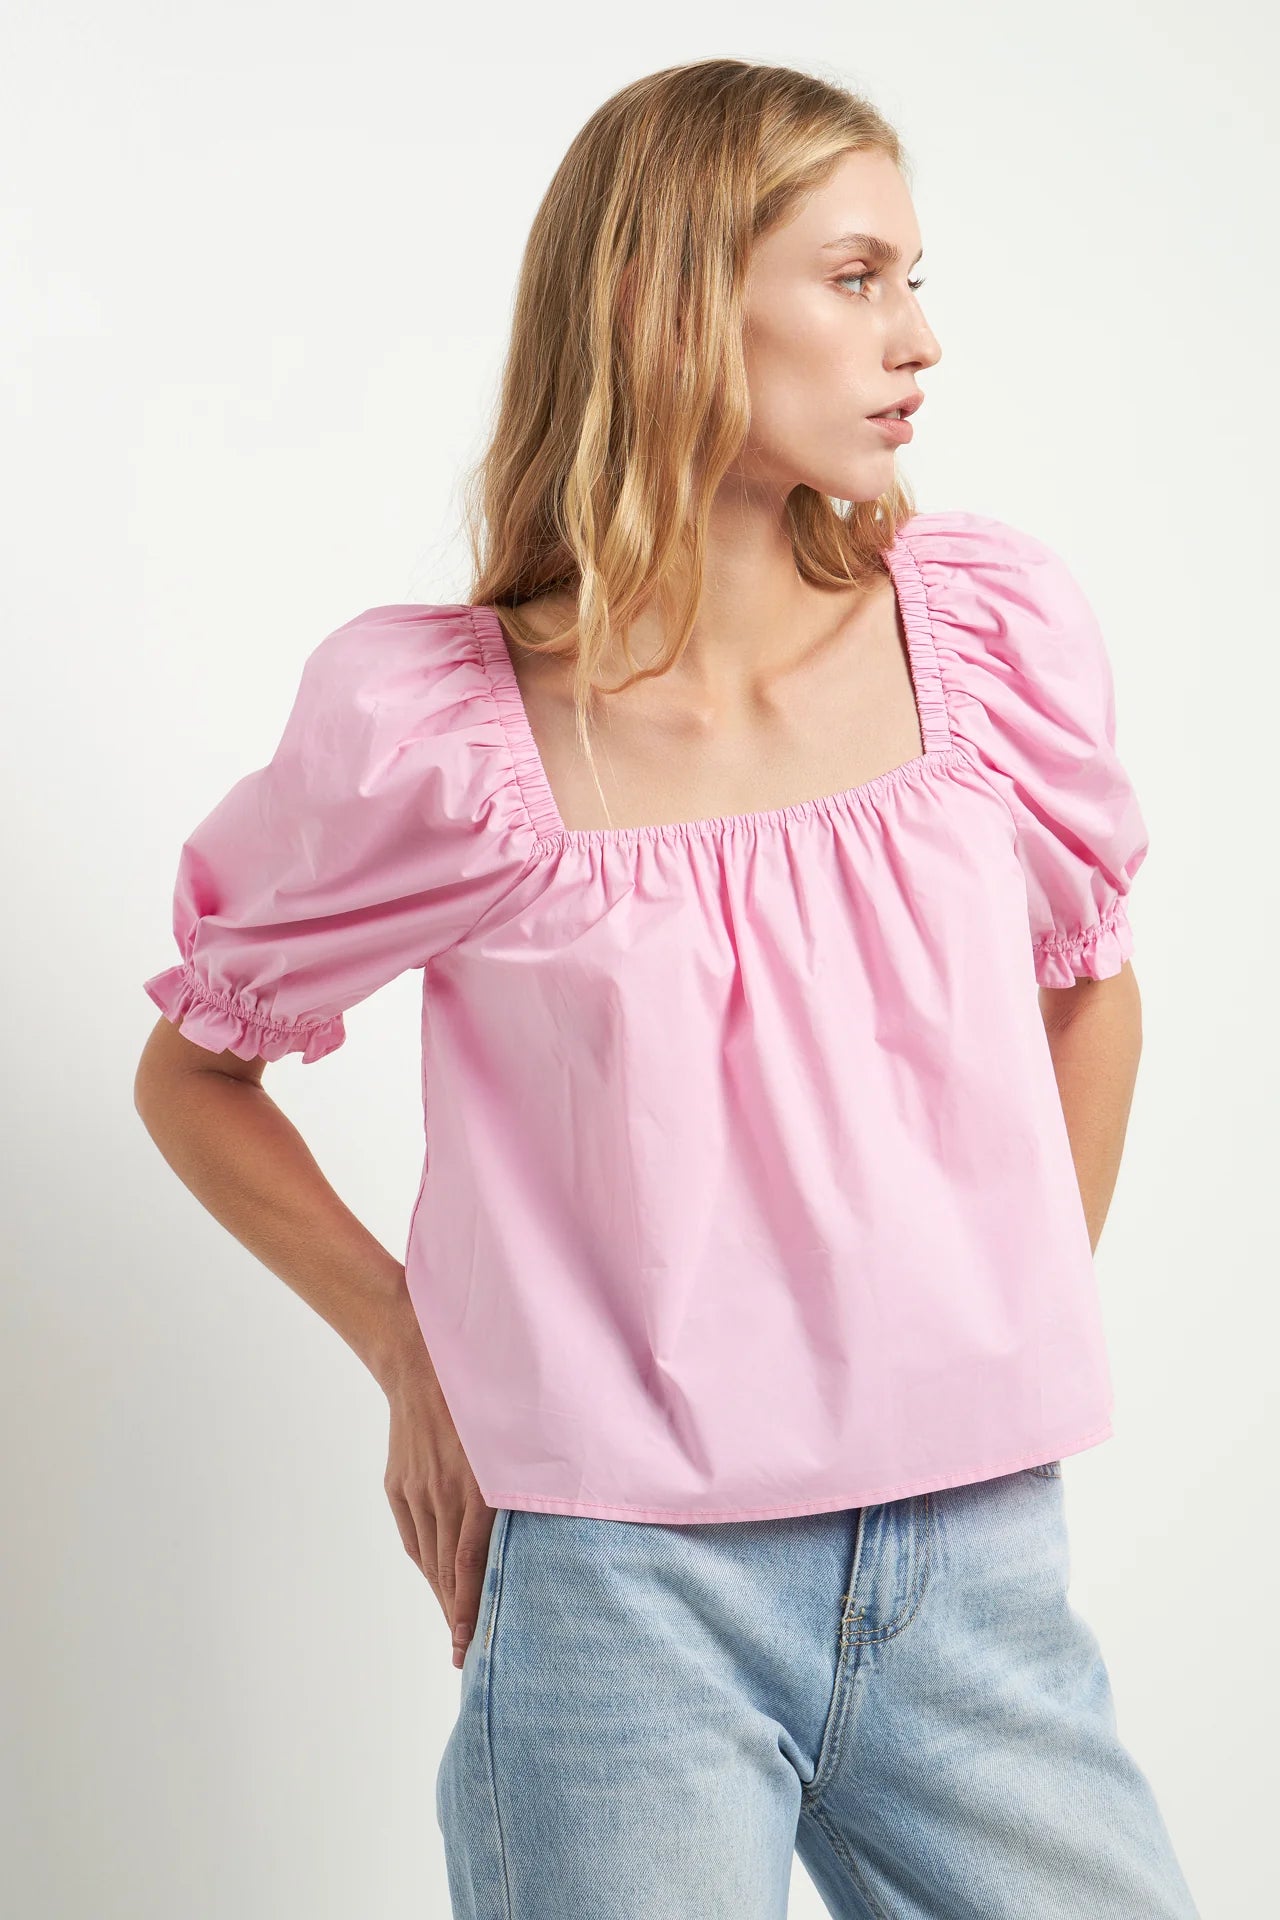 This cute and trendy square neckline Puff Sleeve Top is perfect for any season! The puff sleeves are elastic and cropped giving you a stylish and comfortable look. The square neckline is flattering and fashionable and the top is sure to become one of your favorite go-to tops!